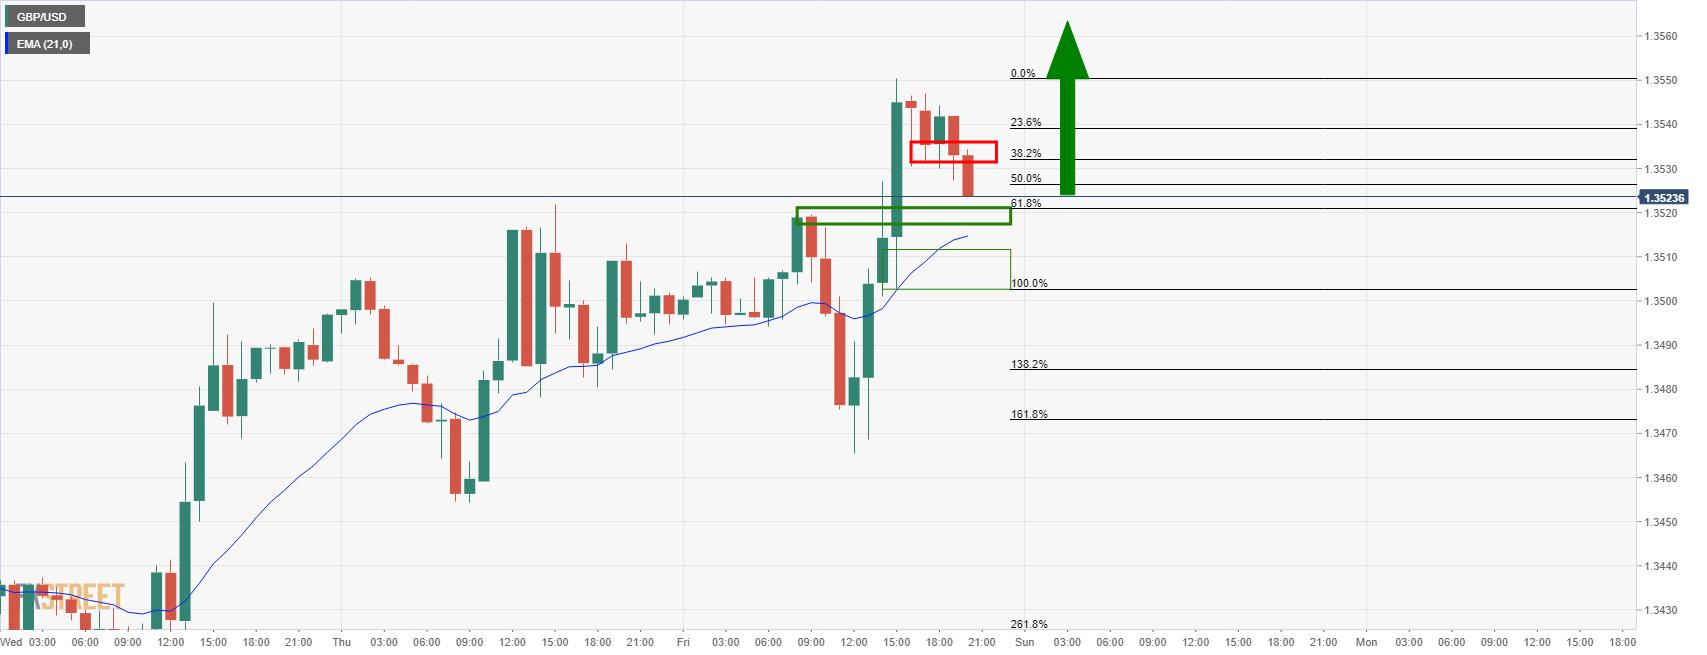 GBP/USD Price Analysis: Bulls looking for a fresh corrective high into the 1.36s